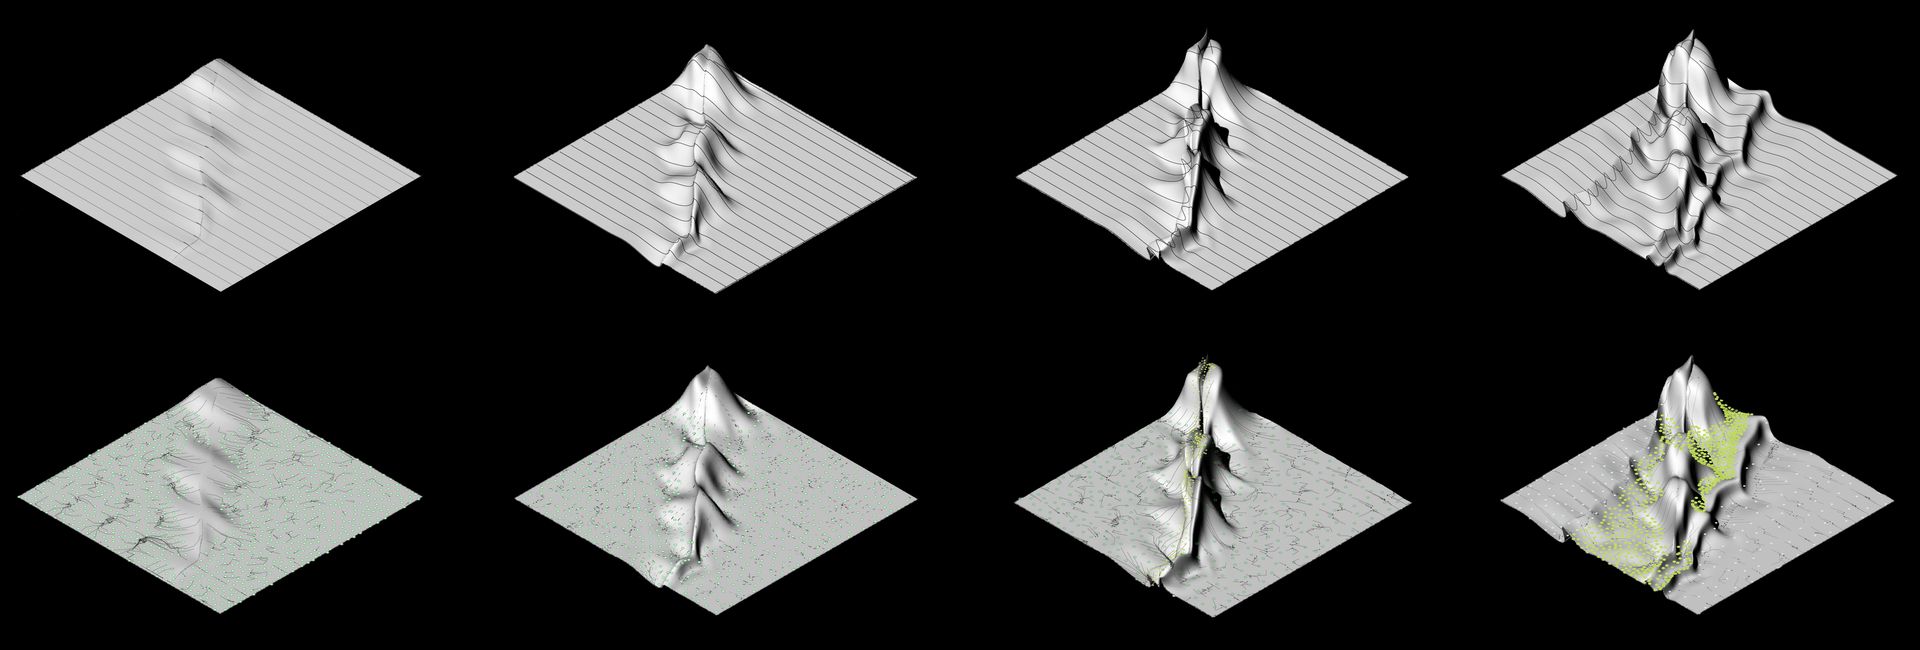 A series of isometric renders of landform showing the emergence of a mountain range and vegetation atop it ^caption: Each of the two rows here are snapshots of a parametric model at four different states. In the top row, the model was produced as a modelling exercise used to introduce parametric methods by creating a series of geometric operations upon a set of 9 curves (that then feed into a loft) in order to enact a geological process (tectonic uplift in this case). In the second row the same model is overlaid with a simple analysis of the grade that informs a projection of how vegetation distributions respond to the changing topography